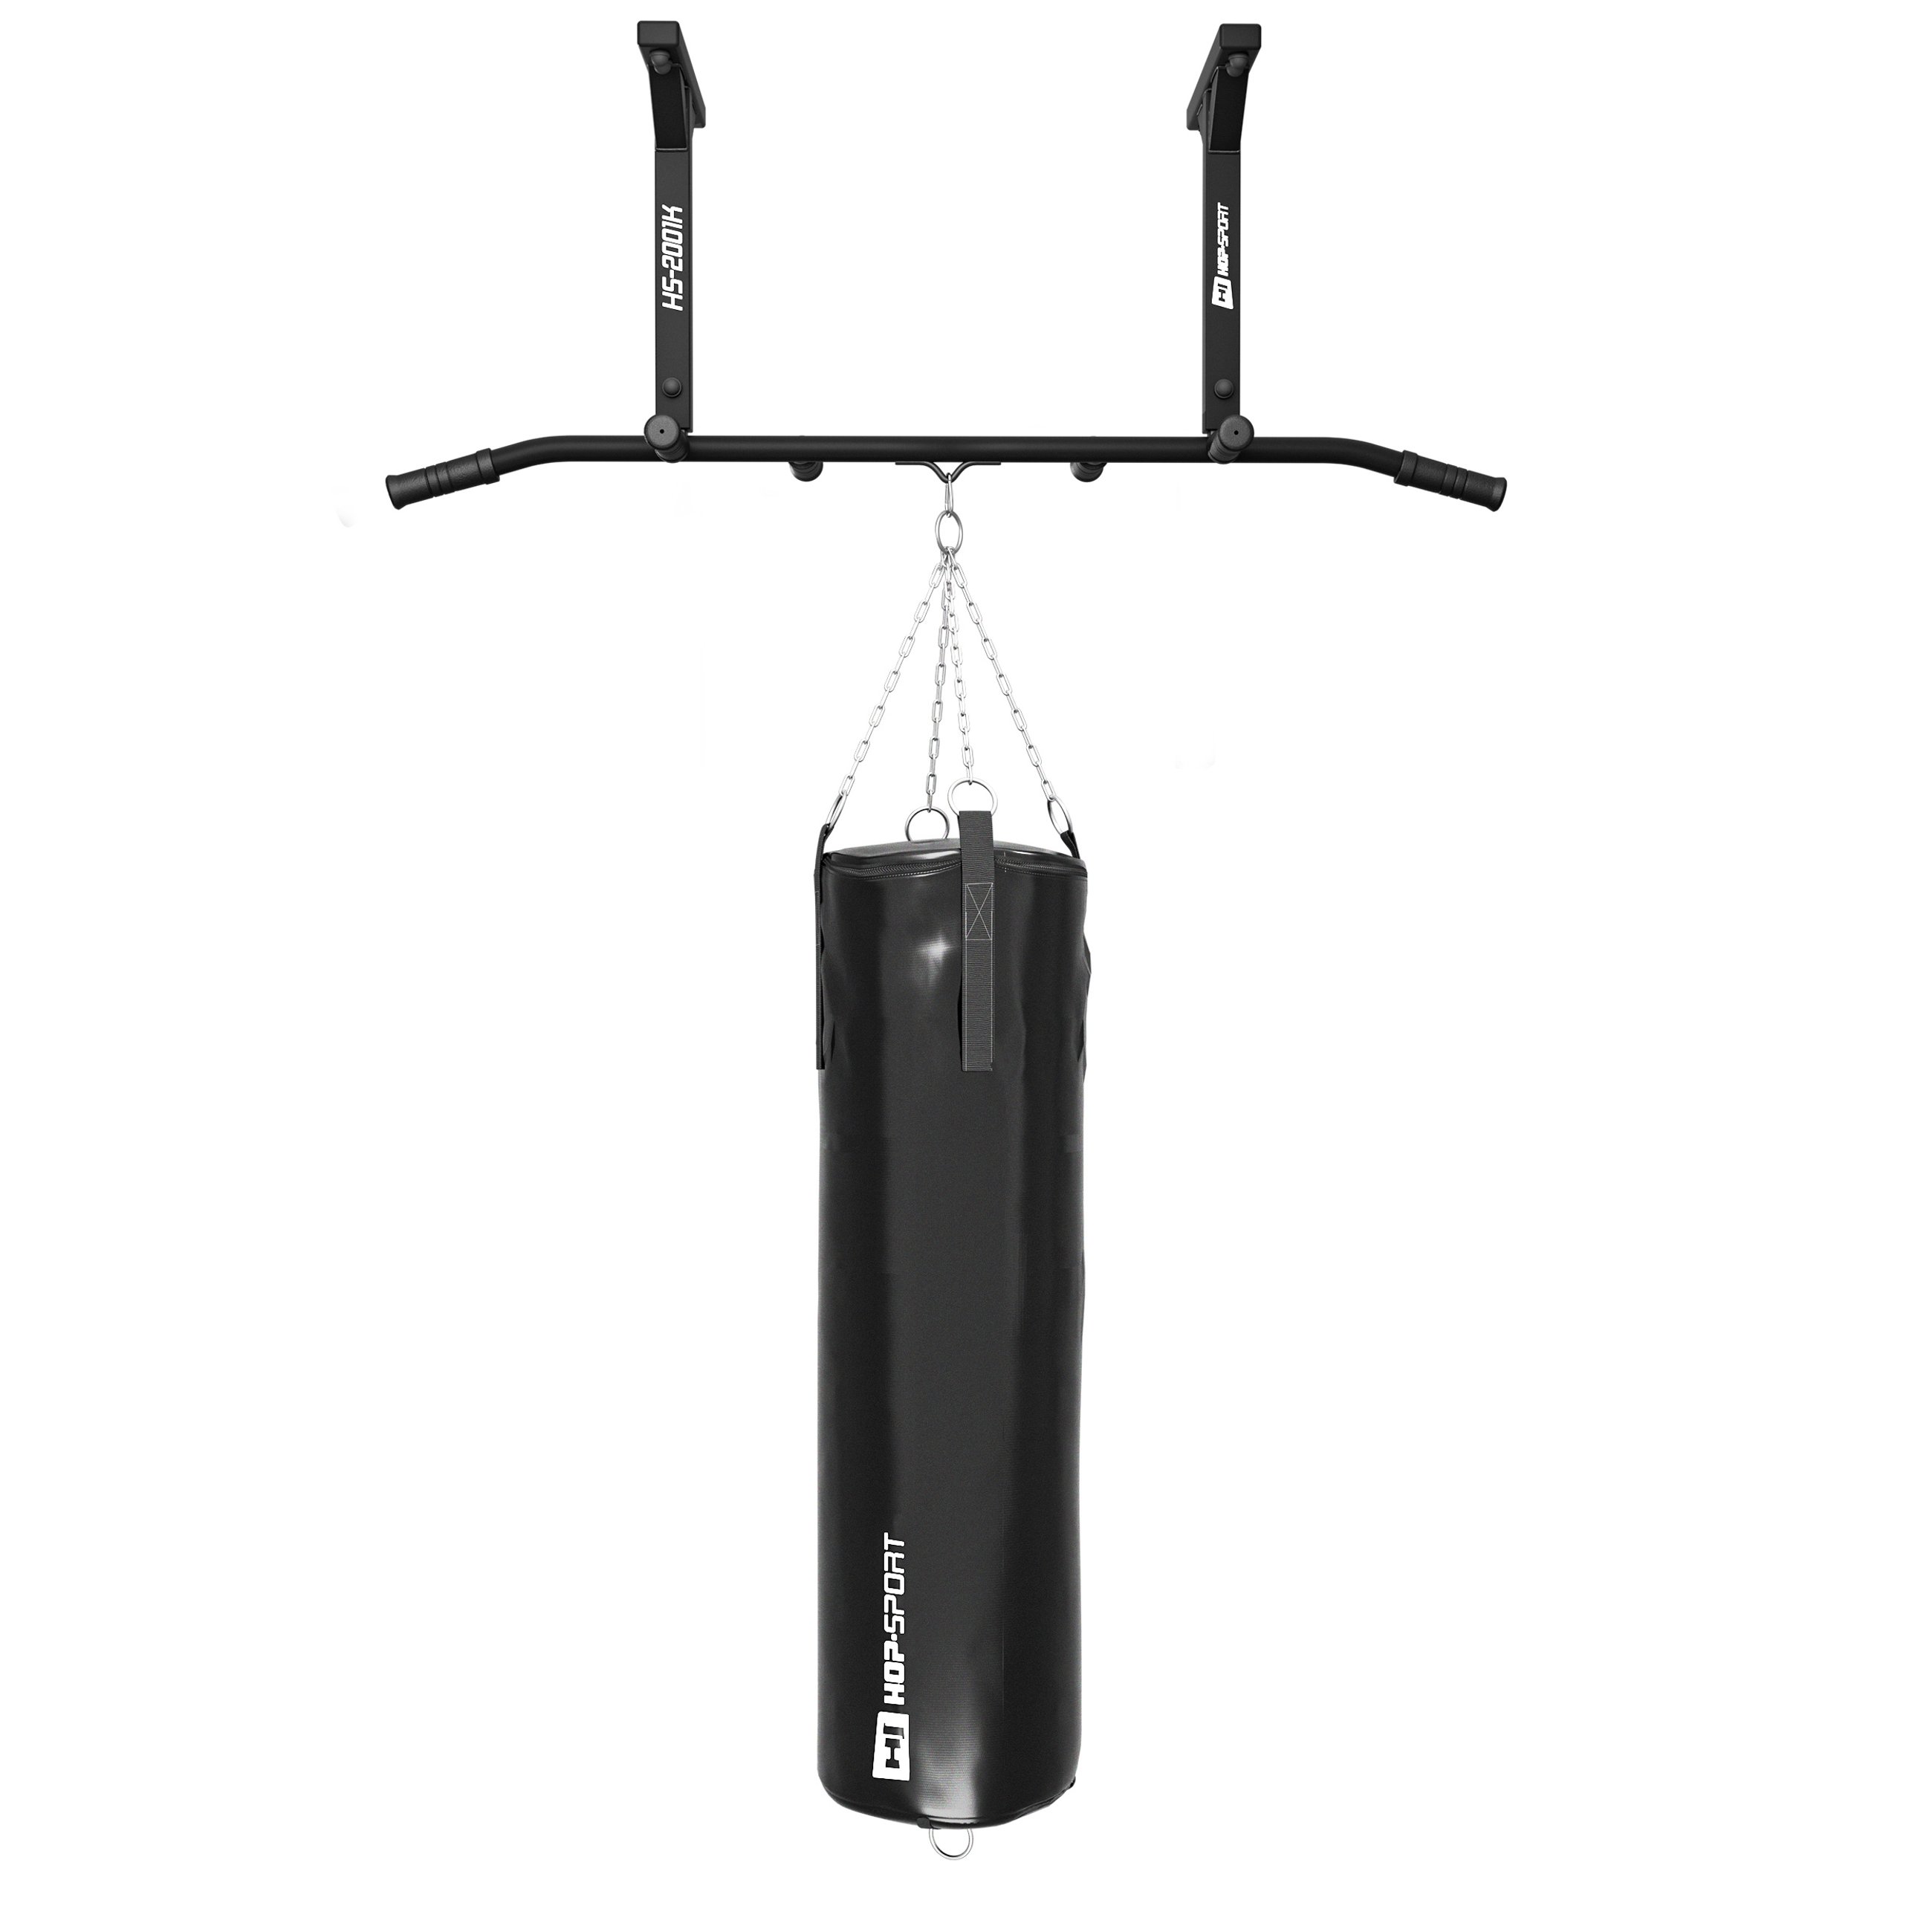 Ceiling Mounted Pull Up Bar HS-2001K